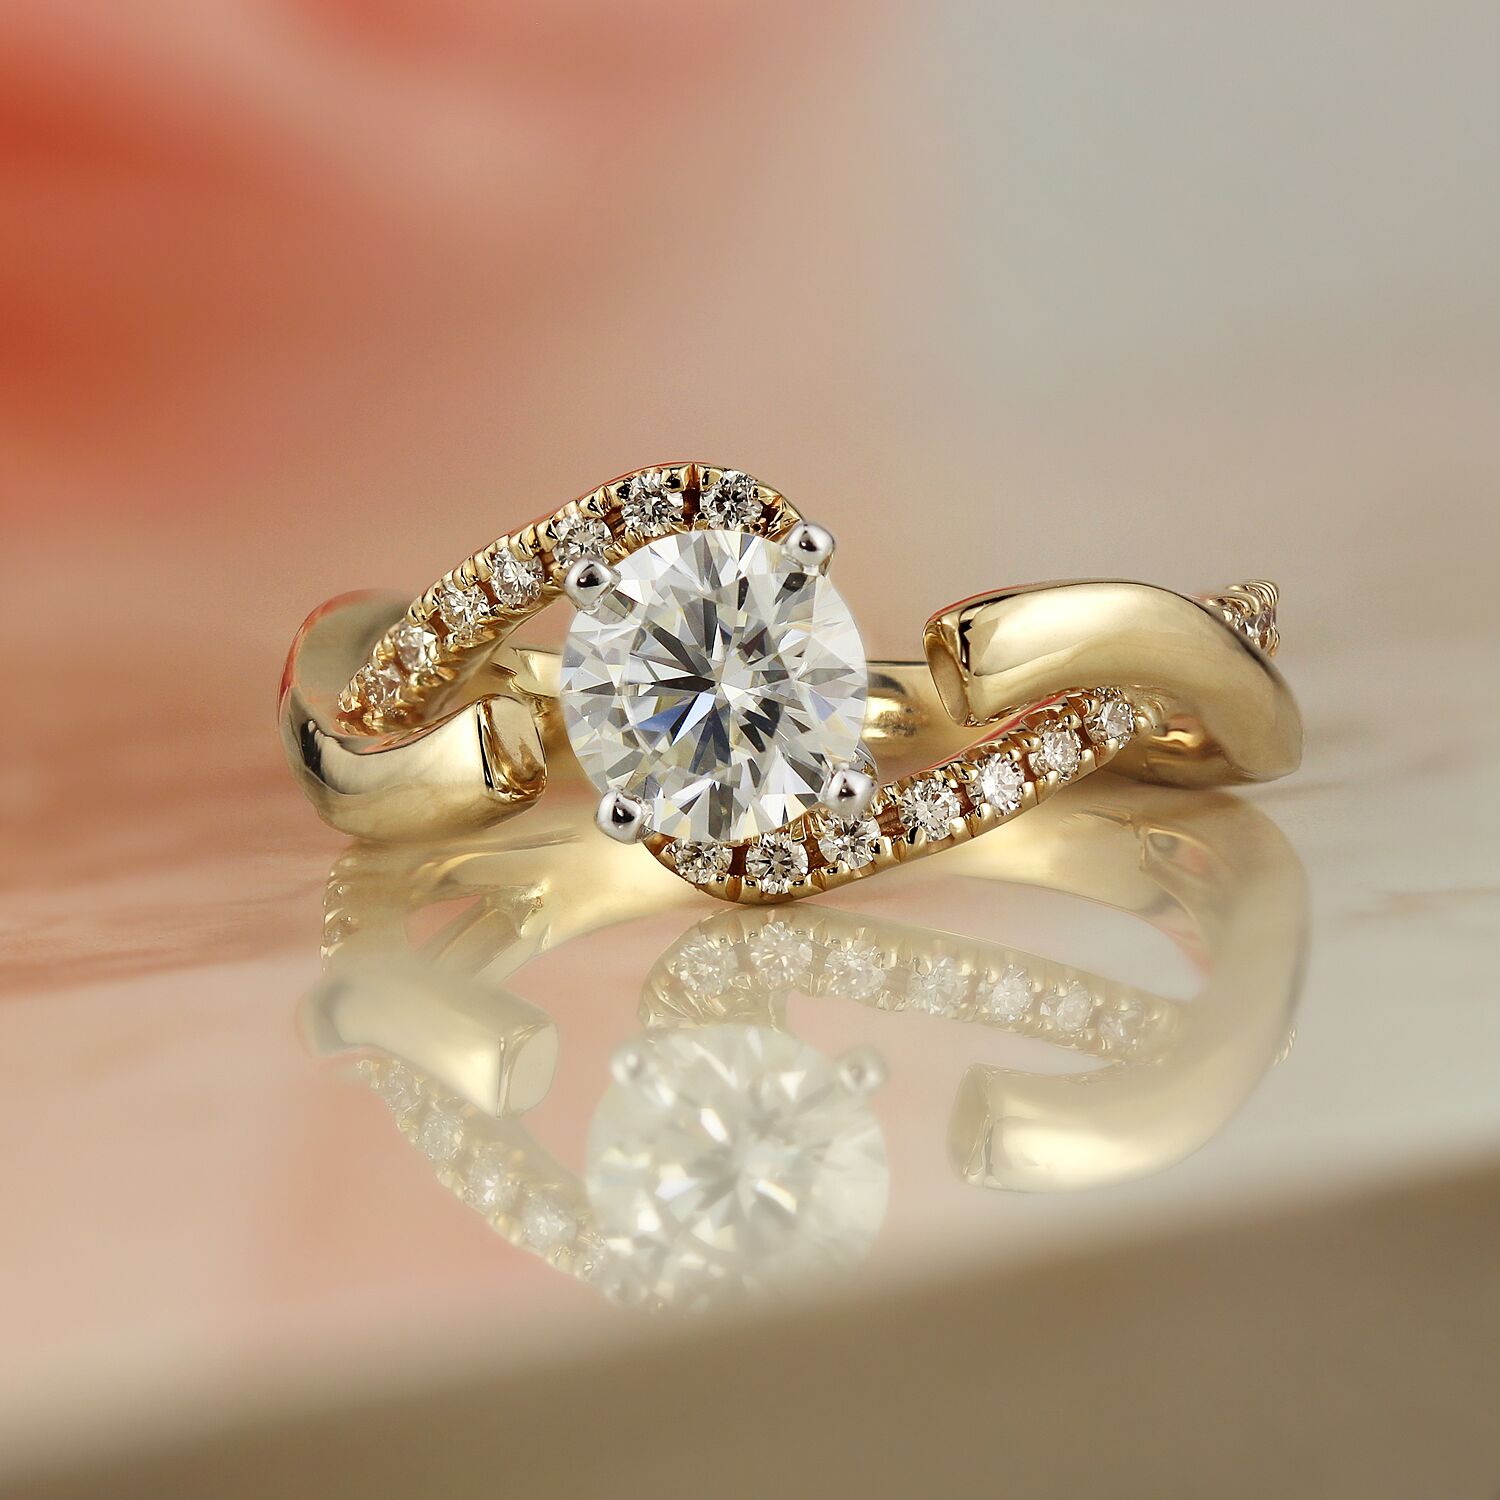 Modern Engagement Ring Styles: The 